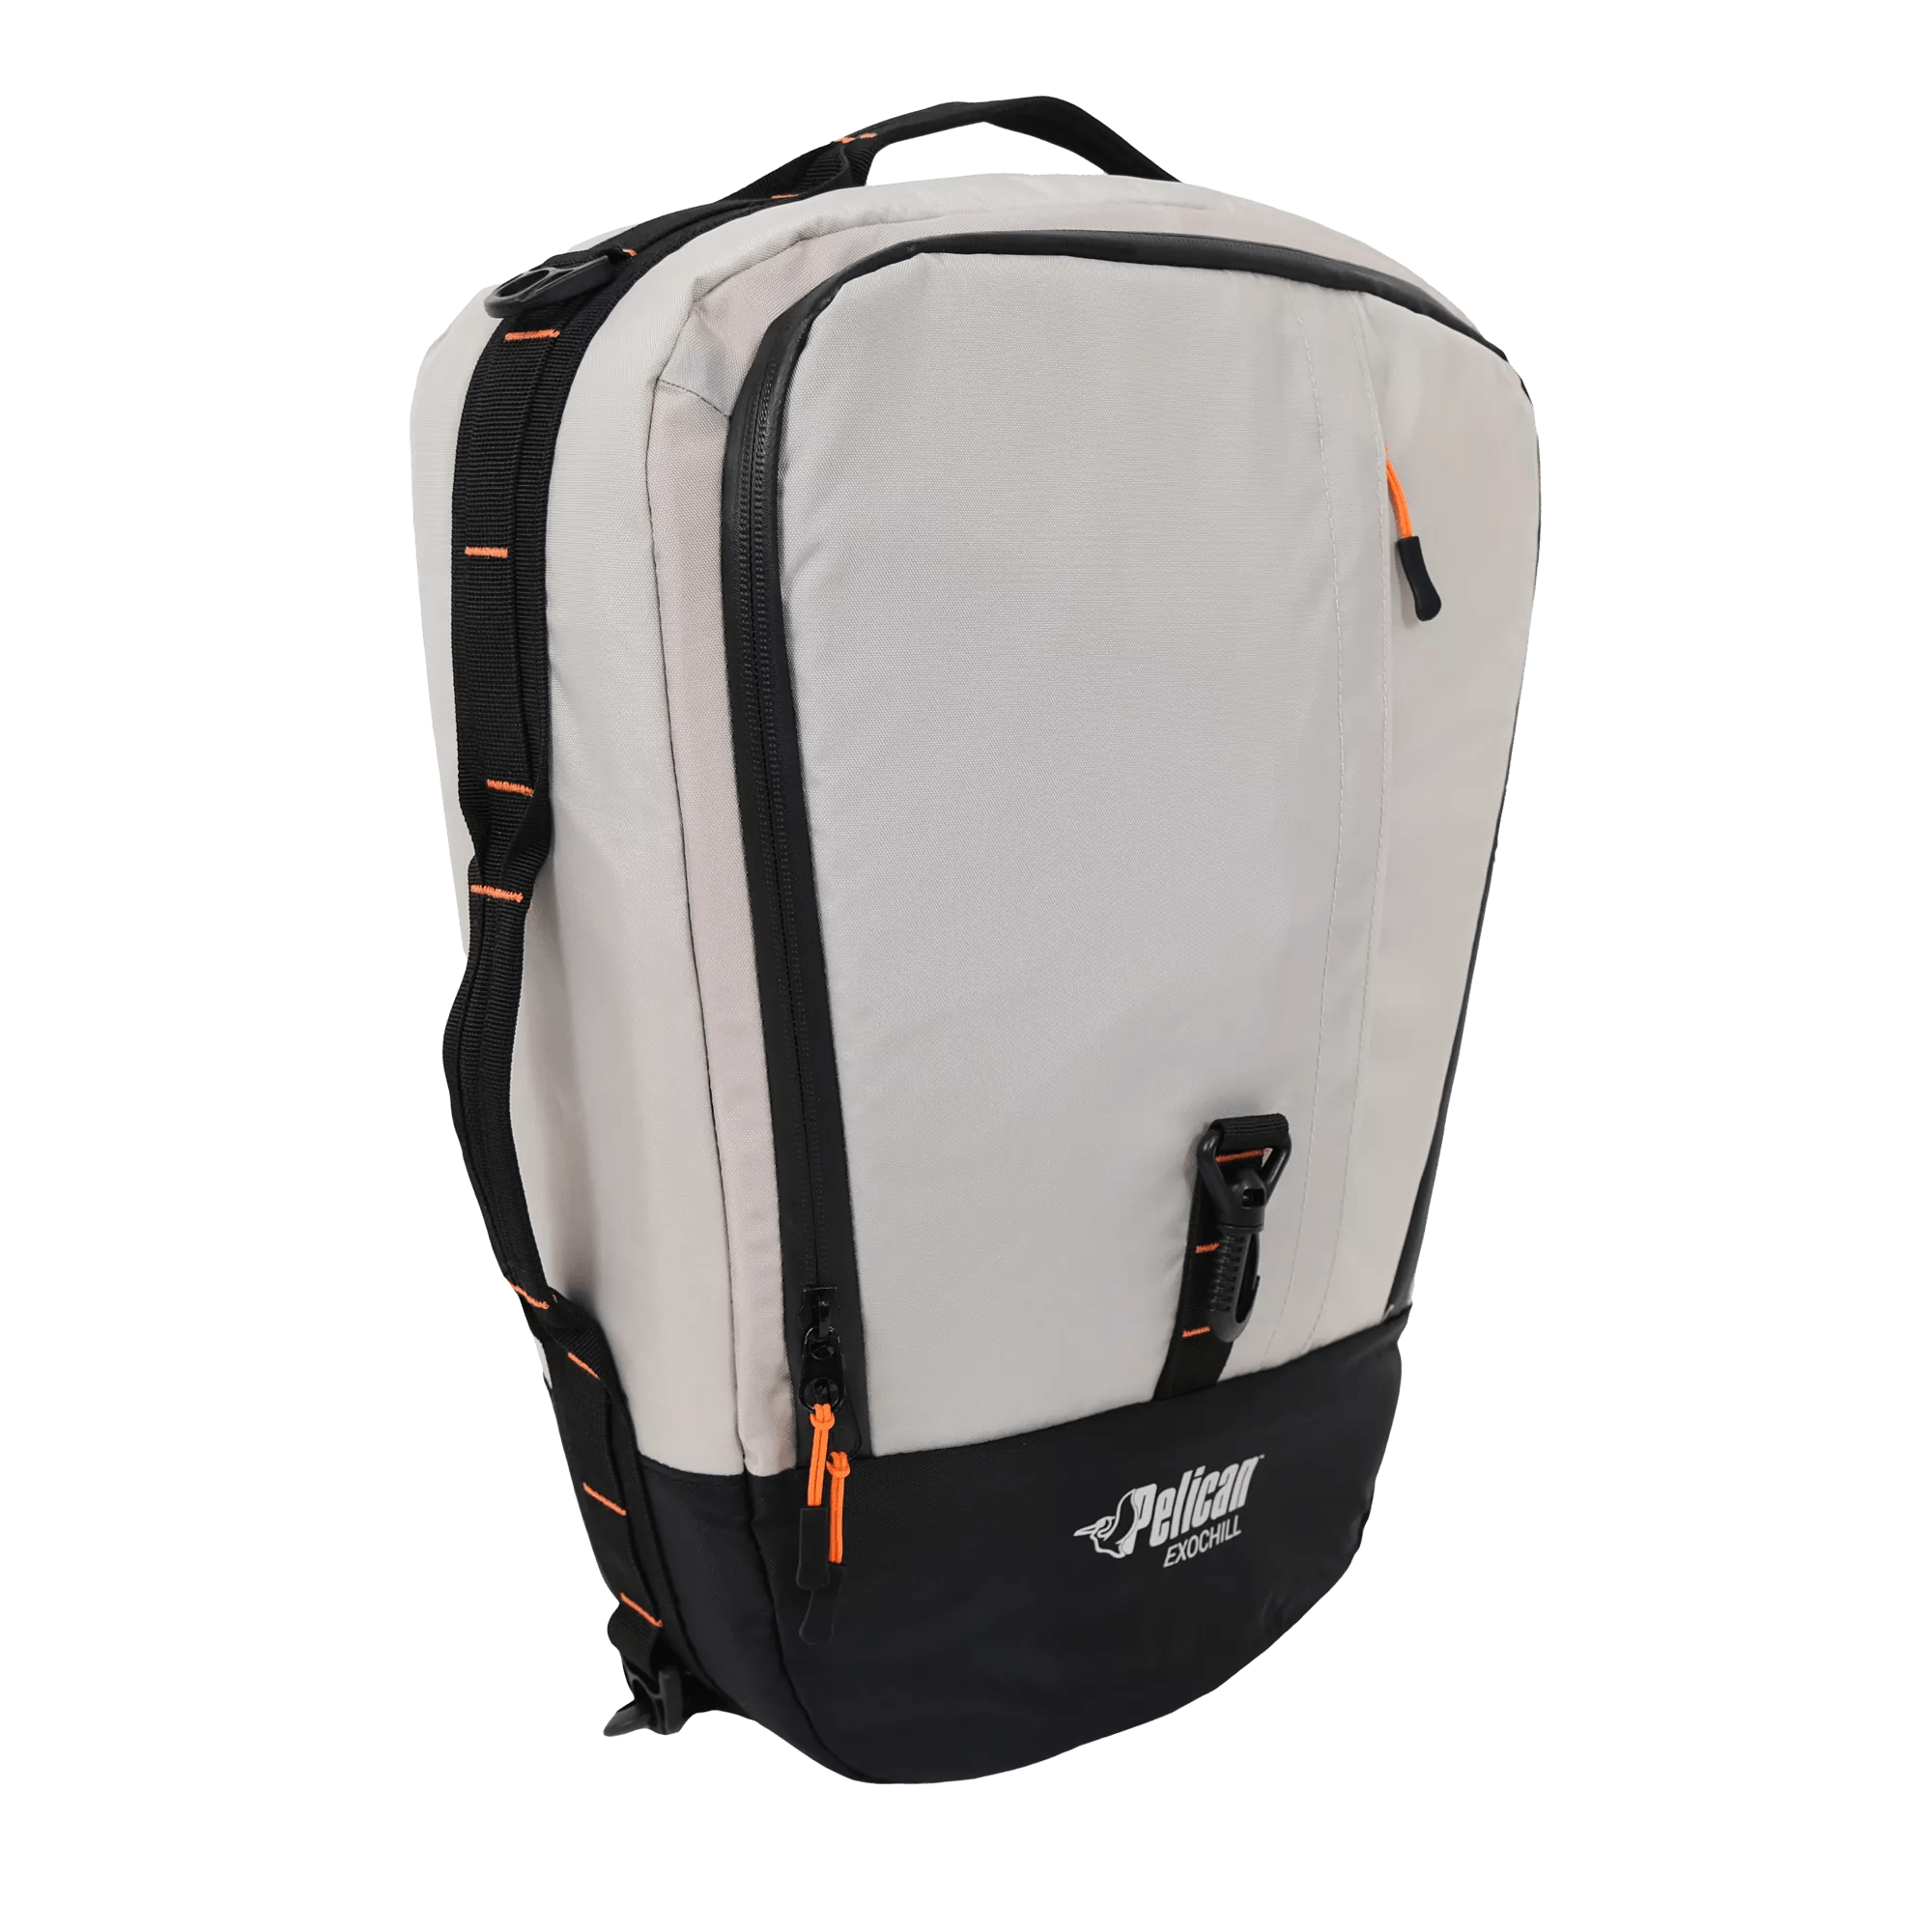 PELICAN - Exochill Soft Cooler - Black - PS3012-00 - ISO